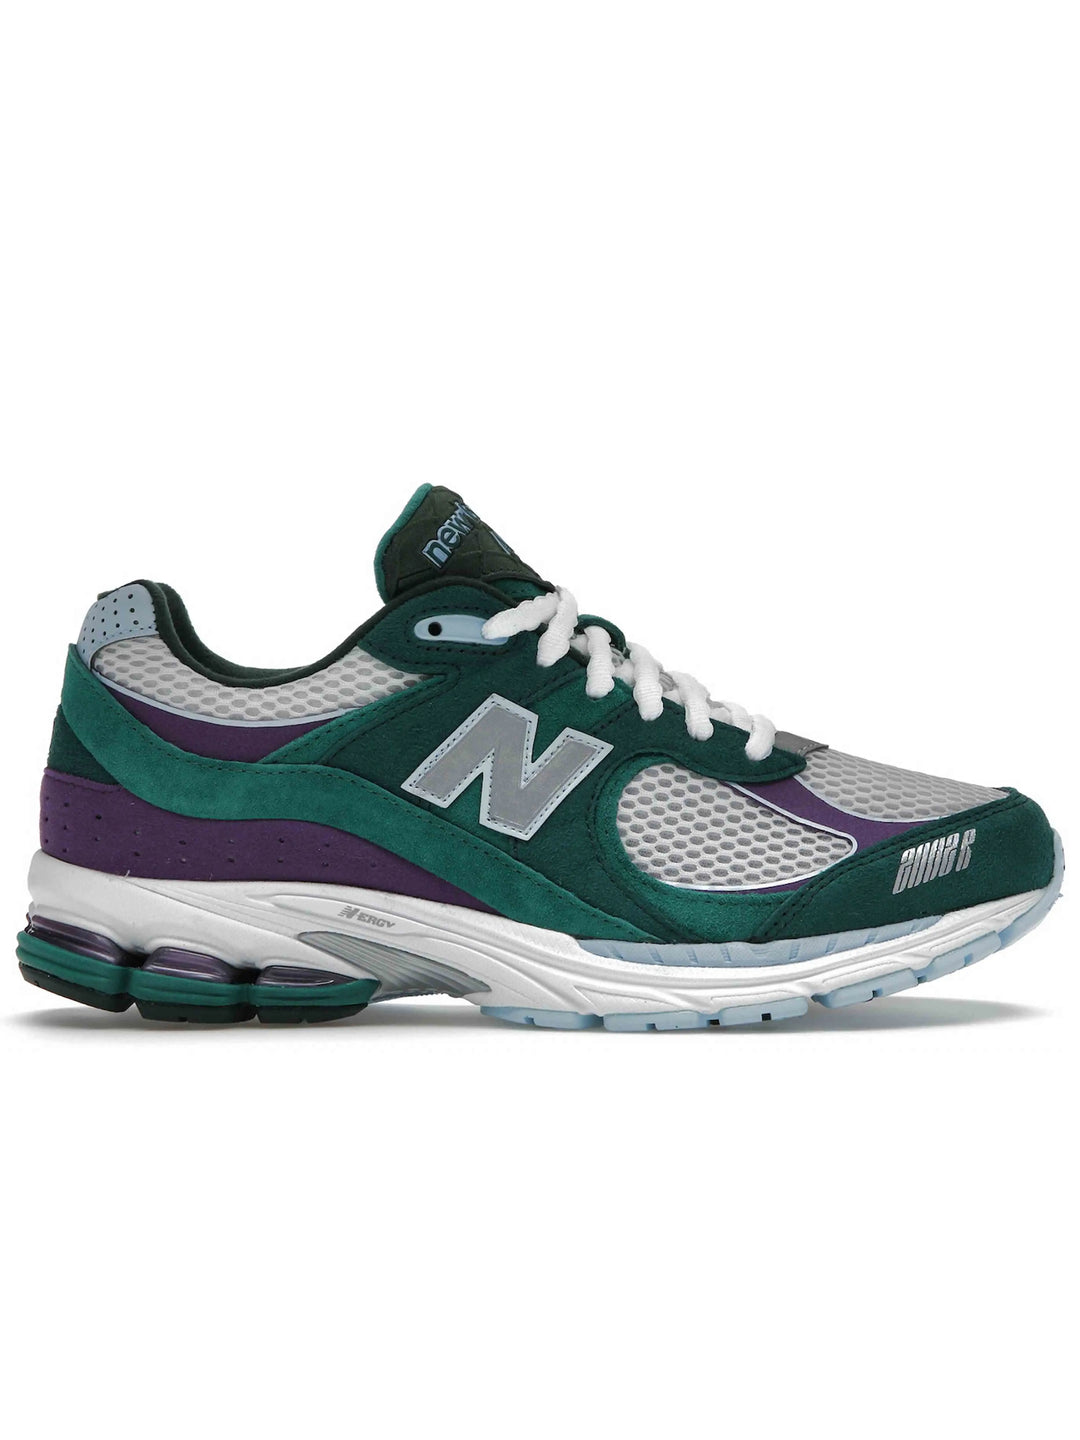 New Balance 2002R Up There Backyard Legends Prior